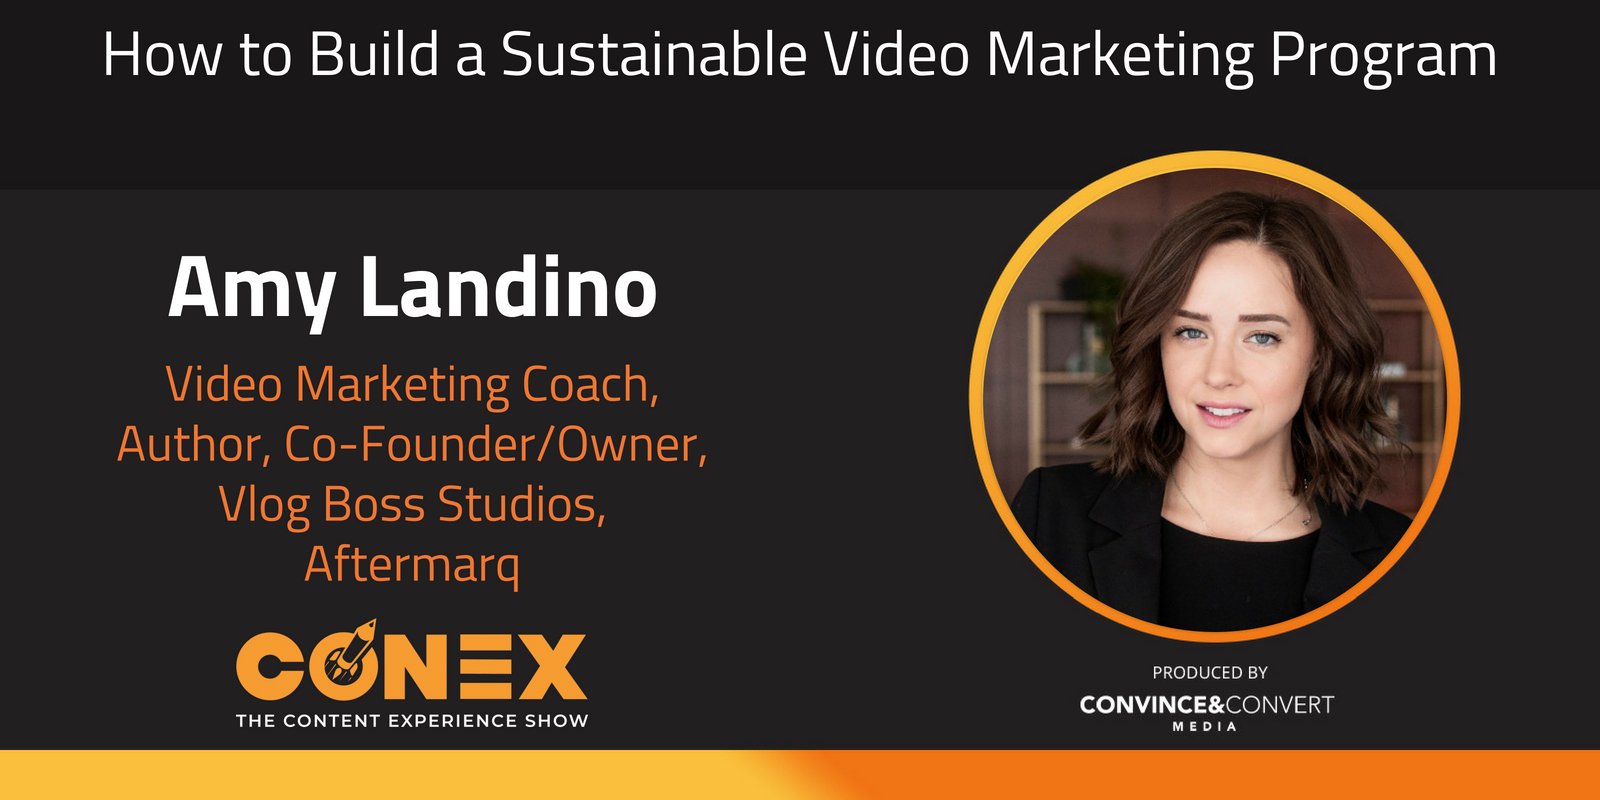 How to Build a Sustainable Video Marketing Program